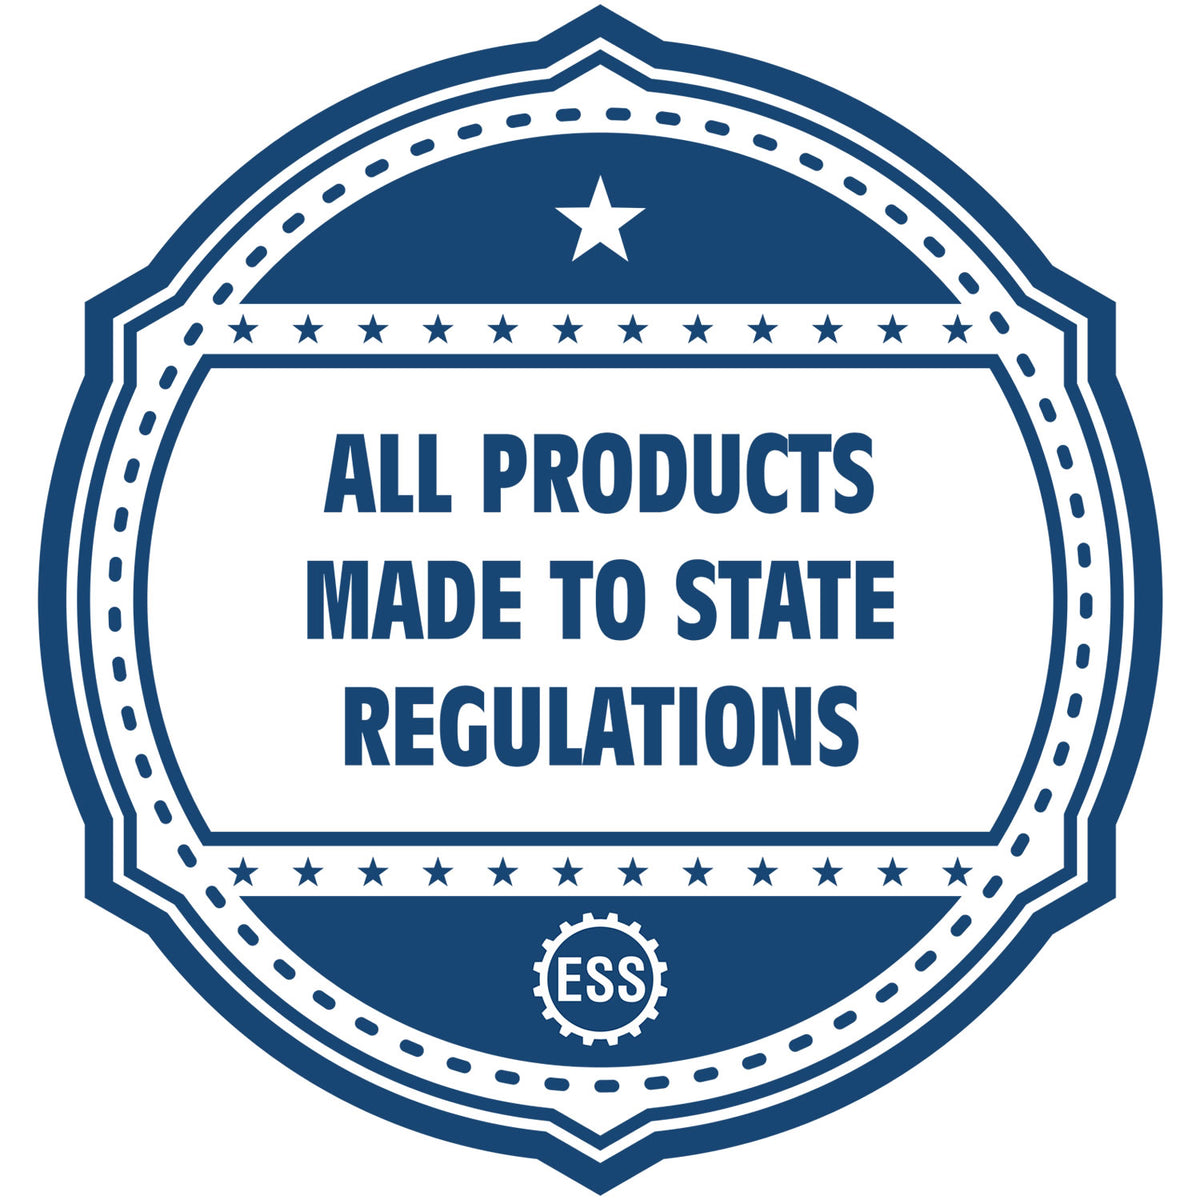 An icon or badge element for the Soft Pocket Michigan Landscape Architect Embosser showing that this product is made in compliance with state regulations.